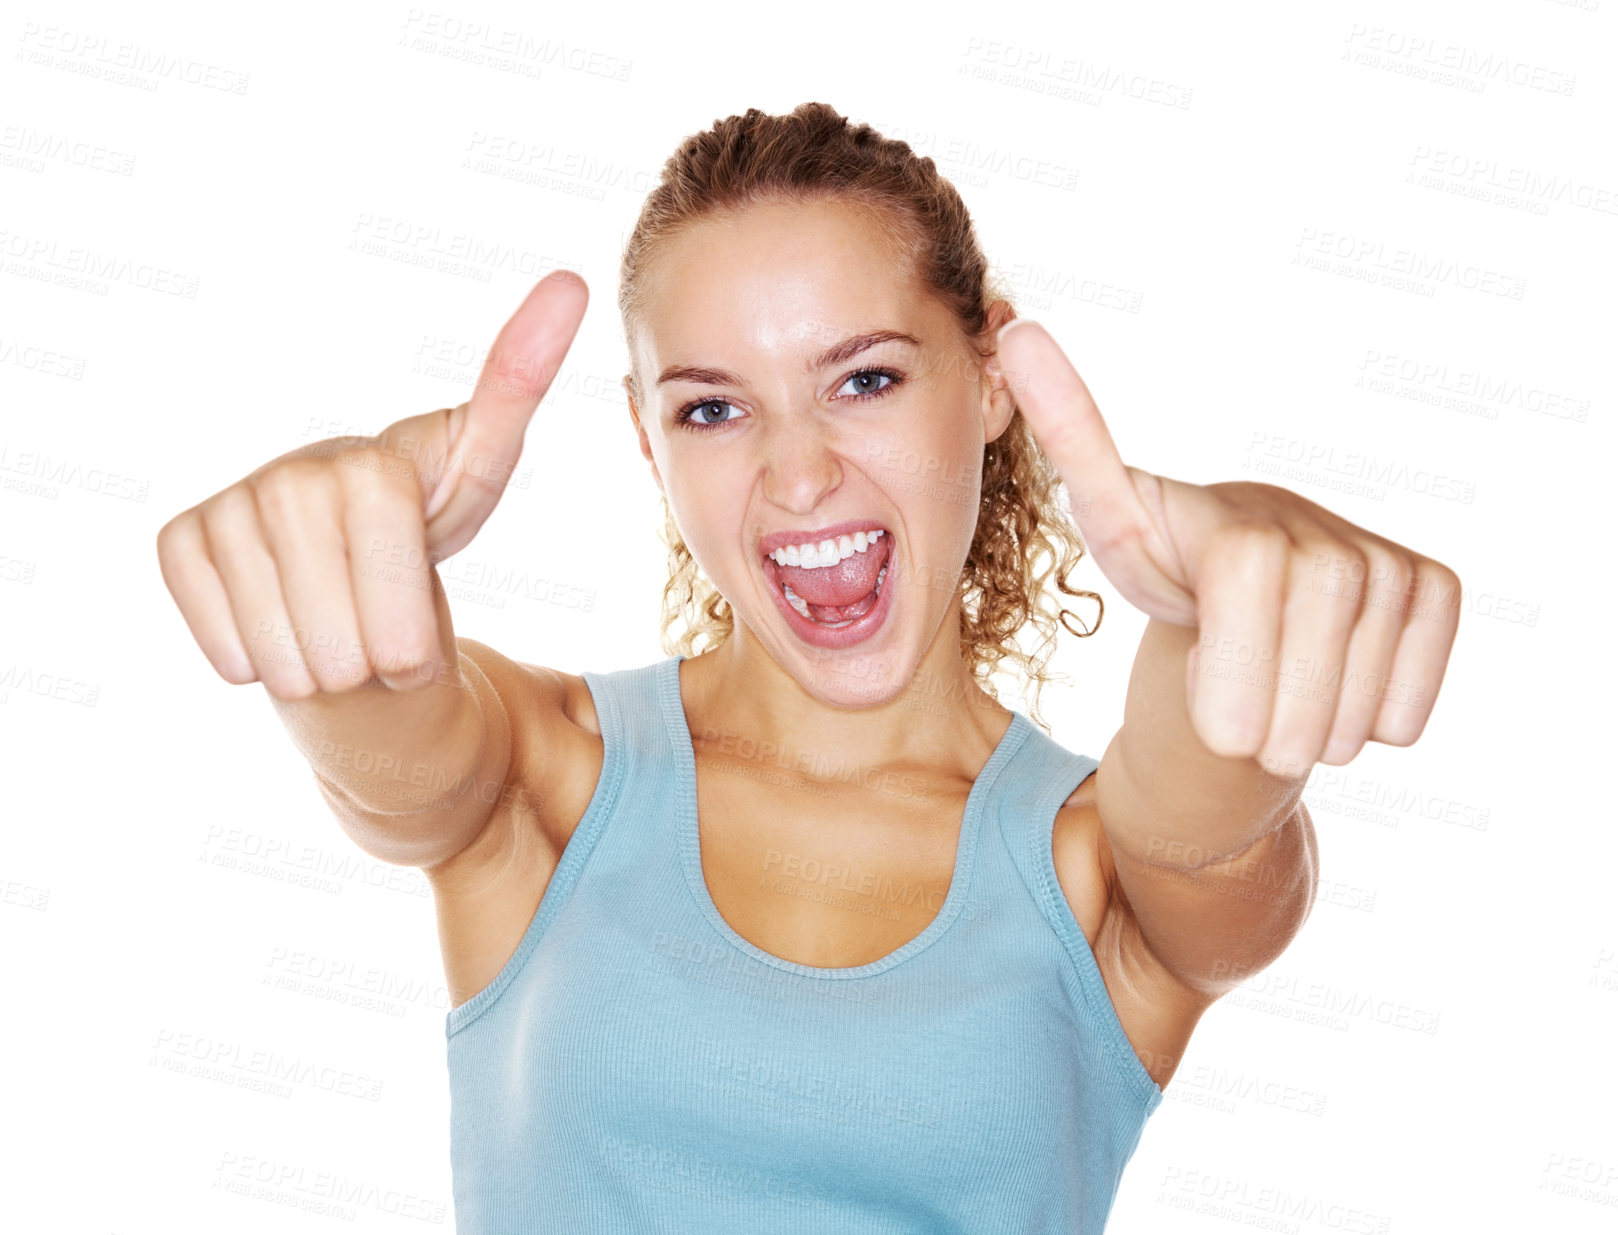 Buy stock photo Young excited female gesturing a thumbs up sign isolated against white